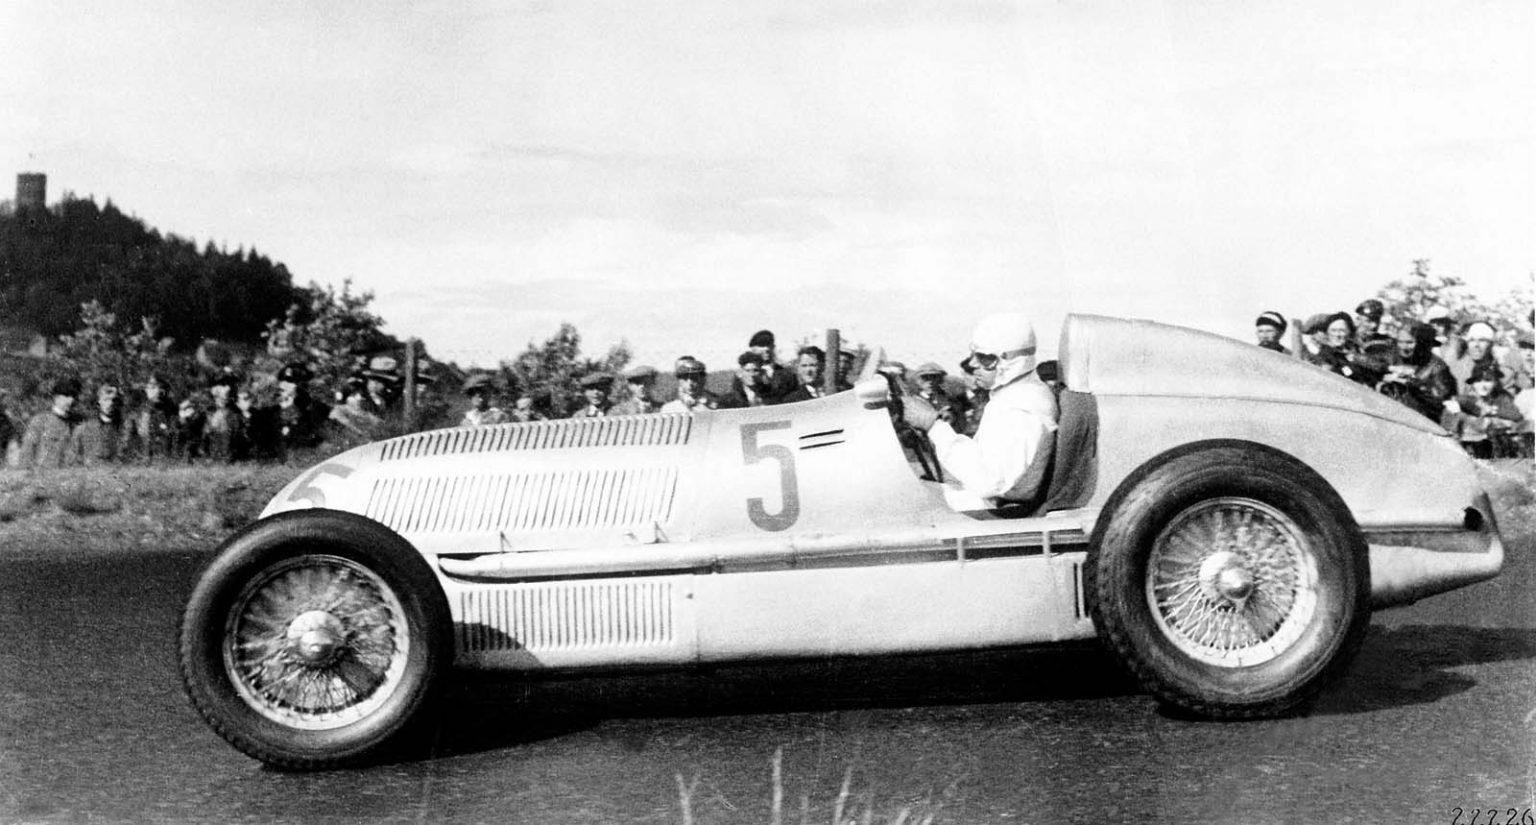 Rudolf Caracciola is crowned the 1935 European Grand Prix Champion at the wheel of the Mercedes-Benz W 25 formula racing car, weighing a mere 750 kilograms. The photograph shows the subsequent winner Caracciola at the international “Eifelrennen” race at Nürburgring on 16 June 1935. (Photo signature in the Mercedes-Benz Classic archive: 22226)